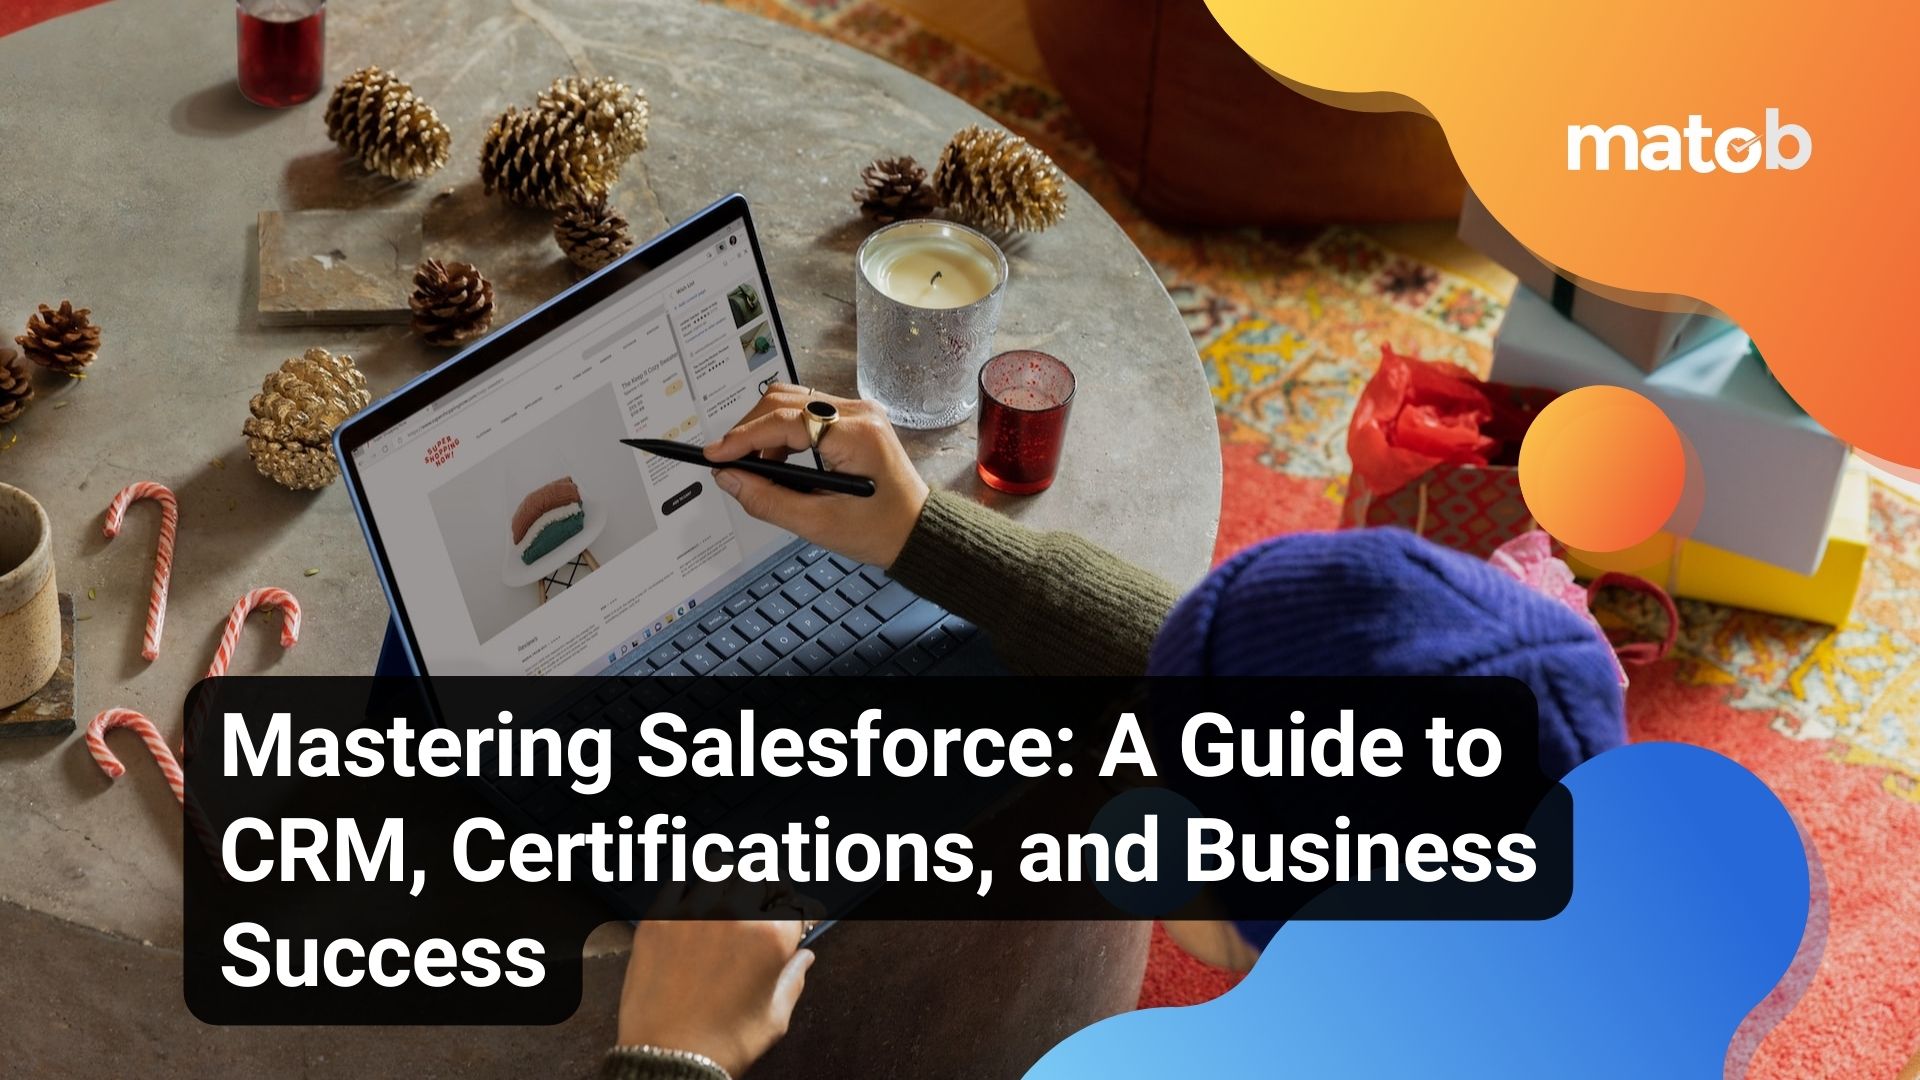 Mastering Salesforce: A Guide to CRM, Certifications, and Business Success